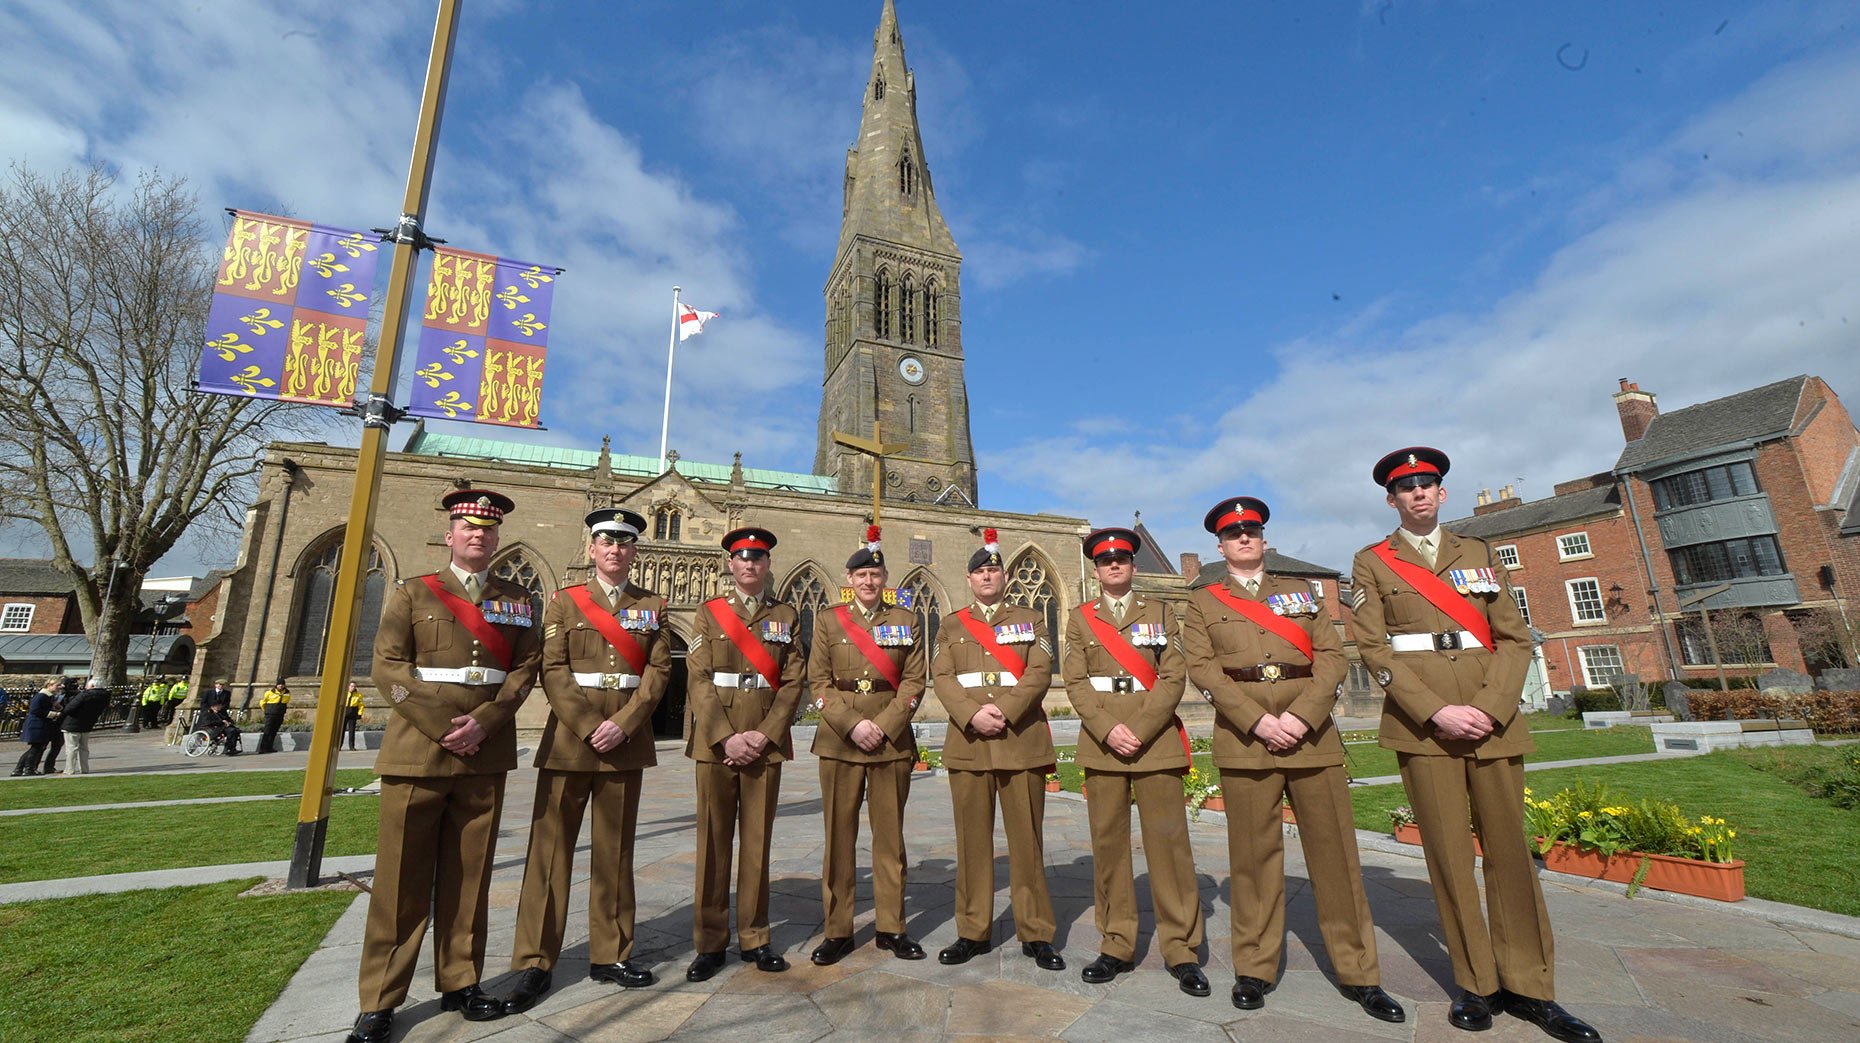 The soldiers of 2 (Leicestershire and Lincolnshire) Company,  3rd Battalion The Royal Anglian Regiment based at Sobraon Barracks, joined four Leicester based soldiers to act as step-liners at the service that was broadcast around the world.